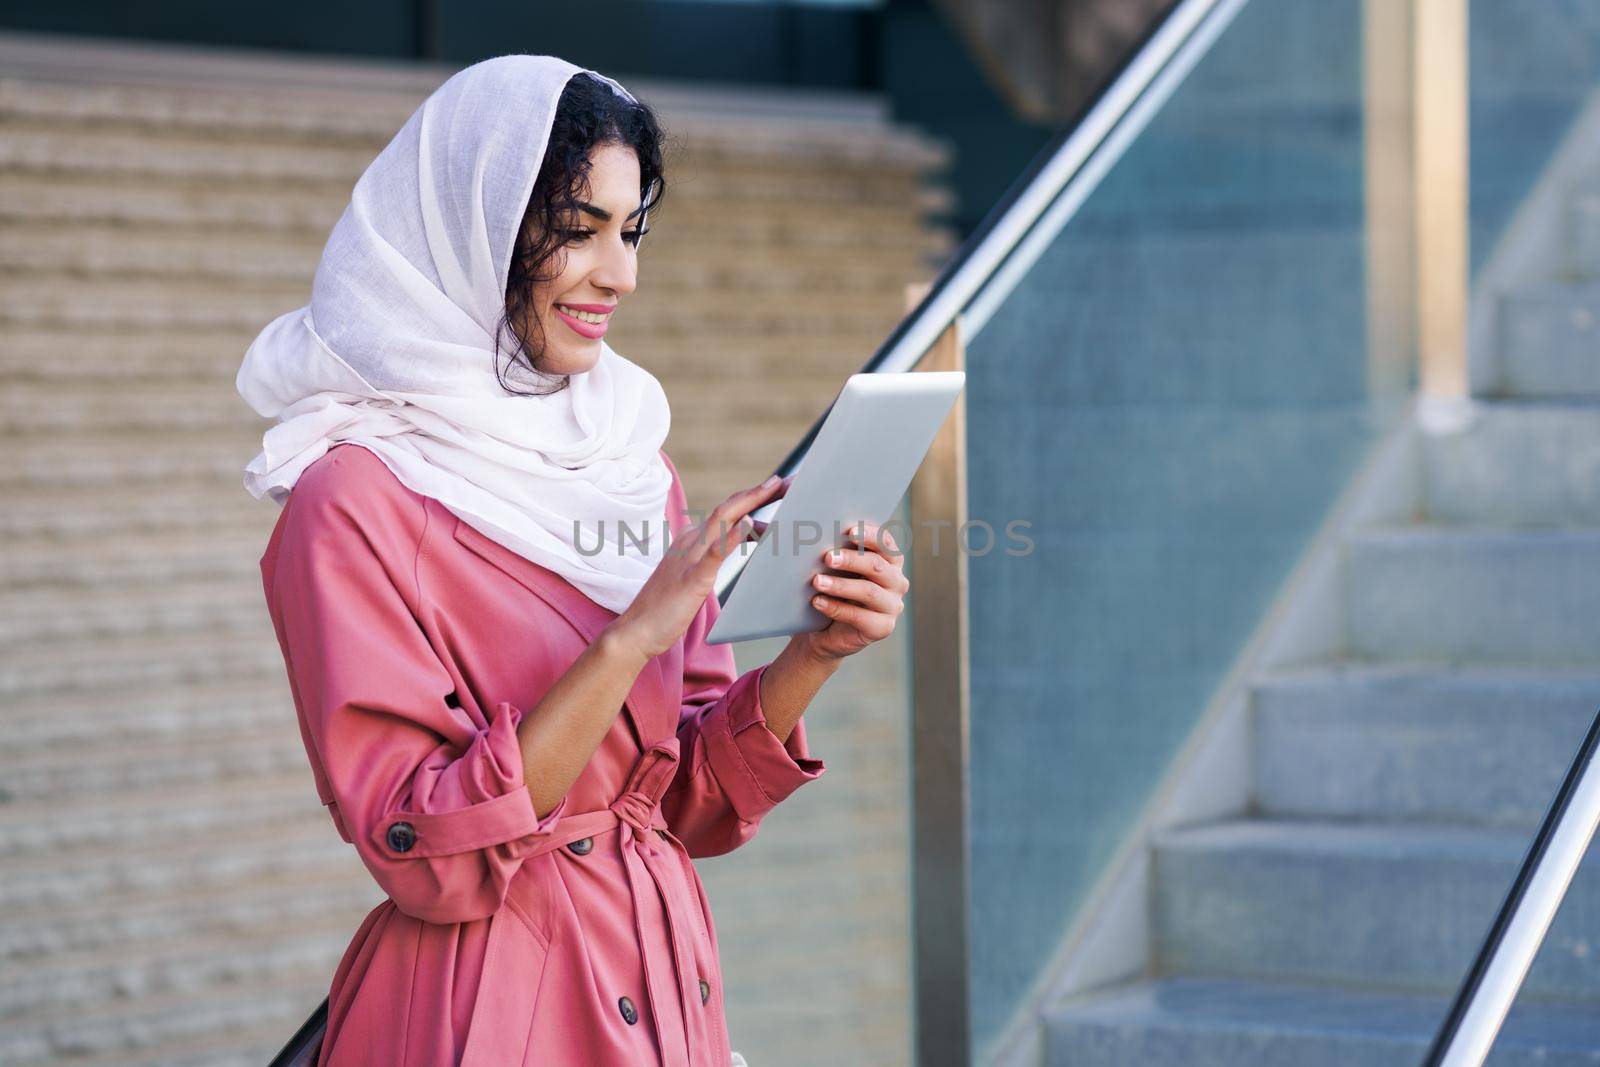 Young Arab woman wearing hijab headscarf using digital tablet in business environment.